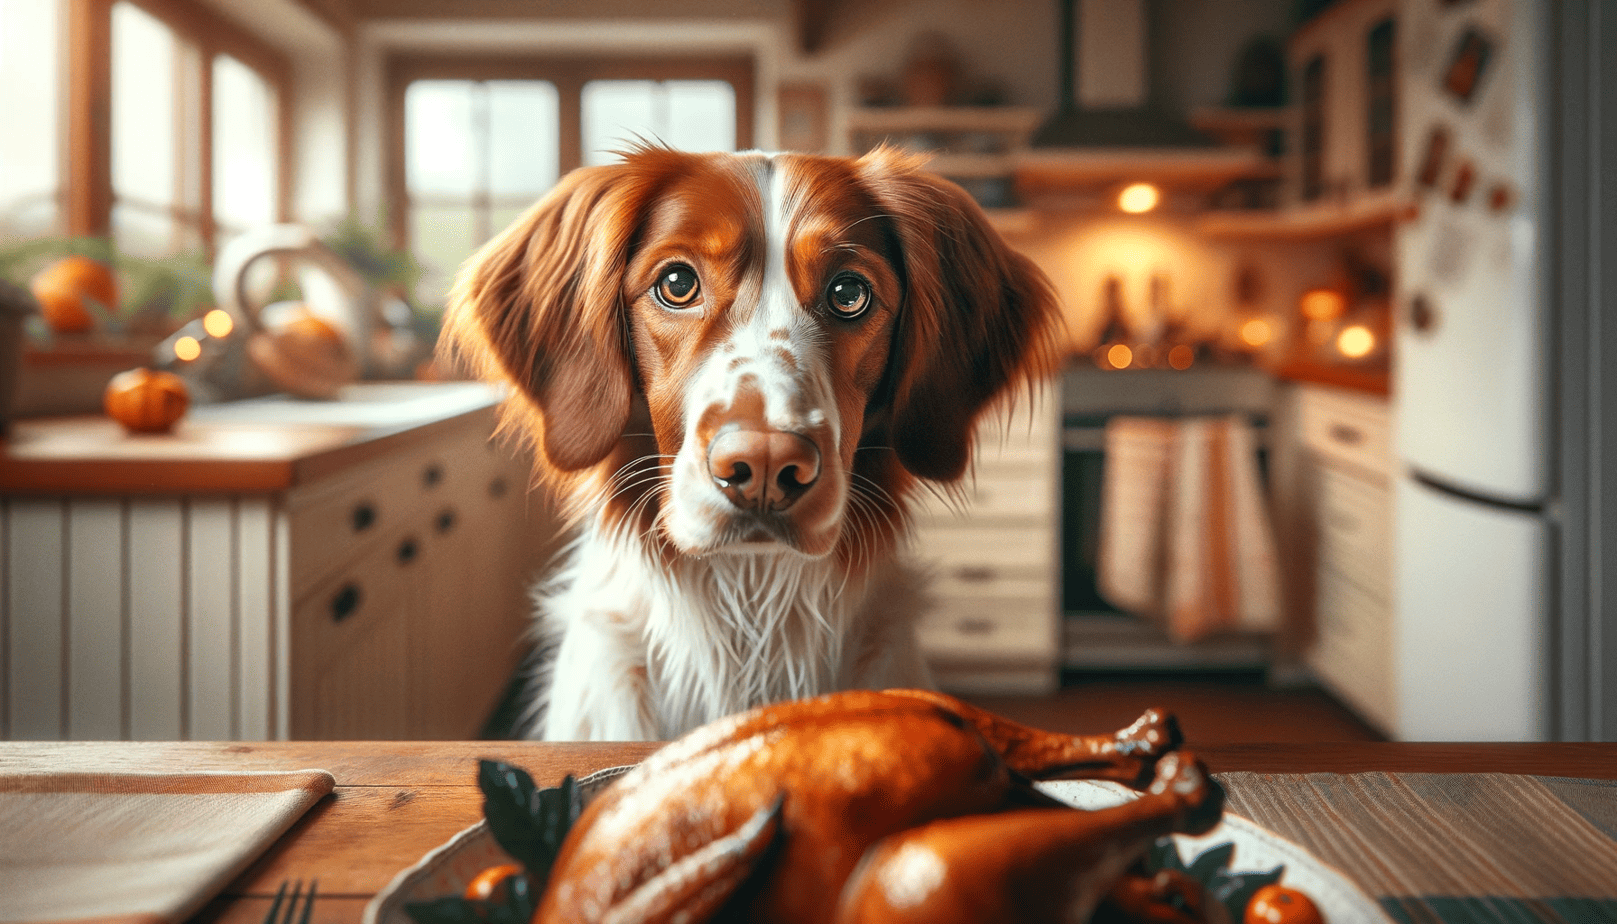 Turkey Allergy In Dogs Explained- Symptoms, Solutions & FAQs